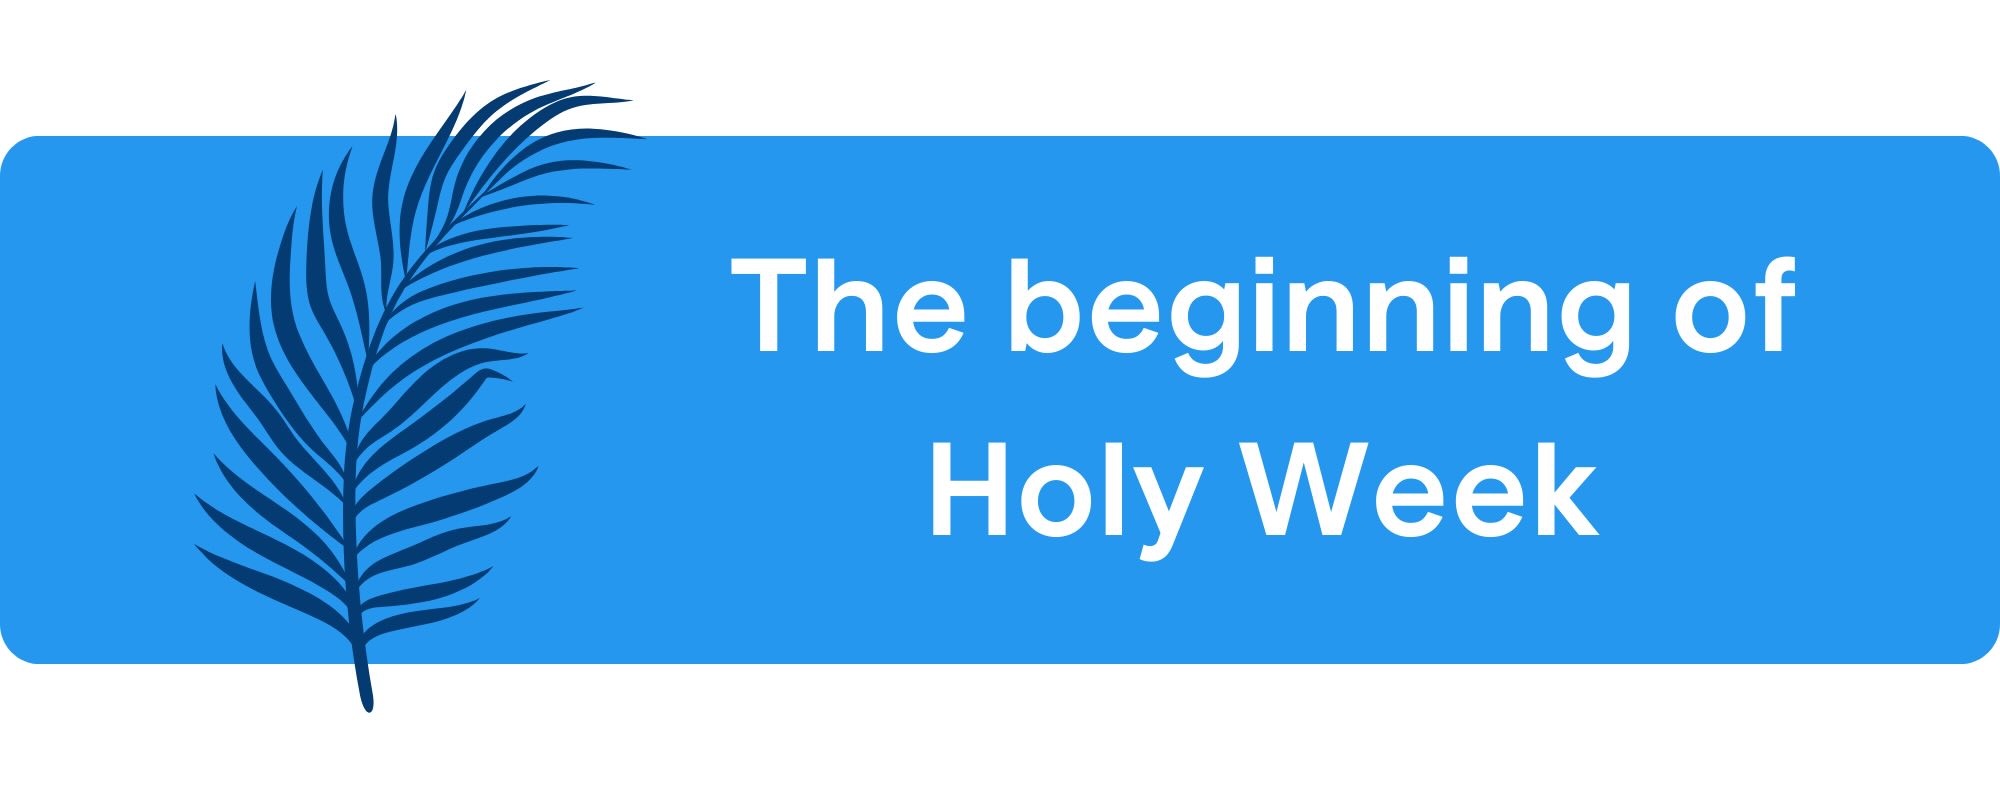 Palm Sunday is the beginning of Holy Week, which is the end of the Lent season